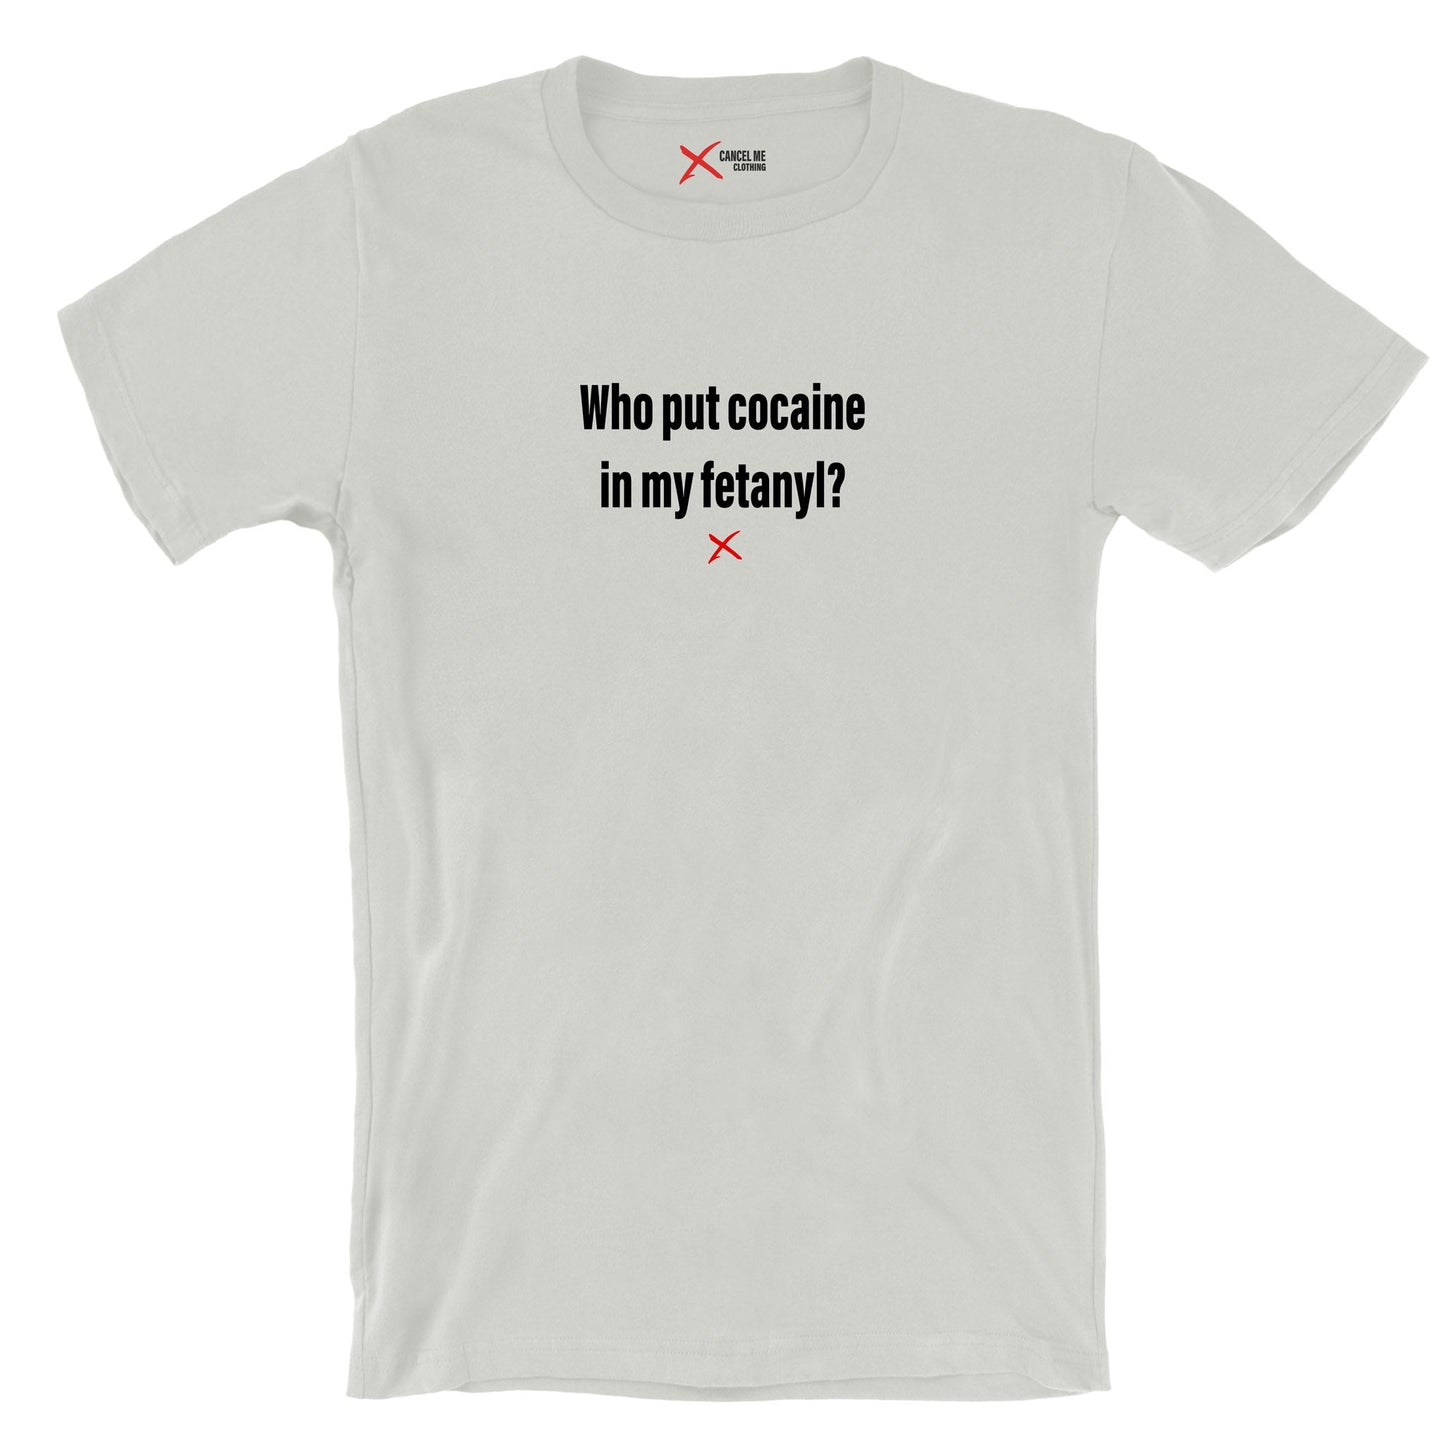 Who put cocaine in my fetanyl? - Shirt